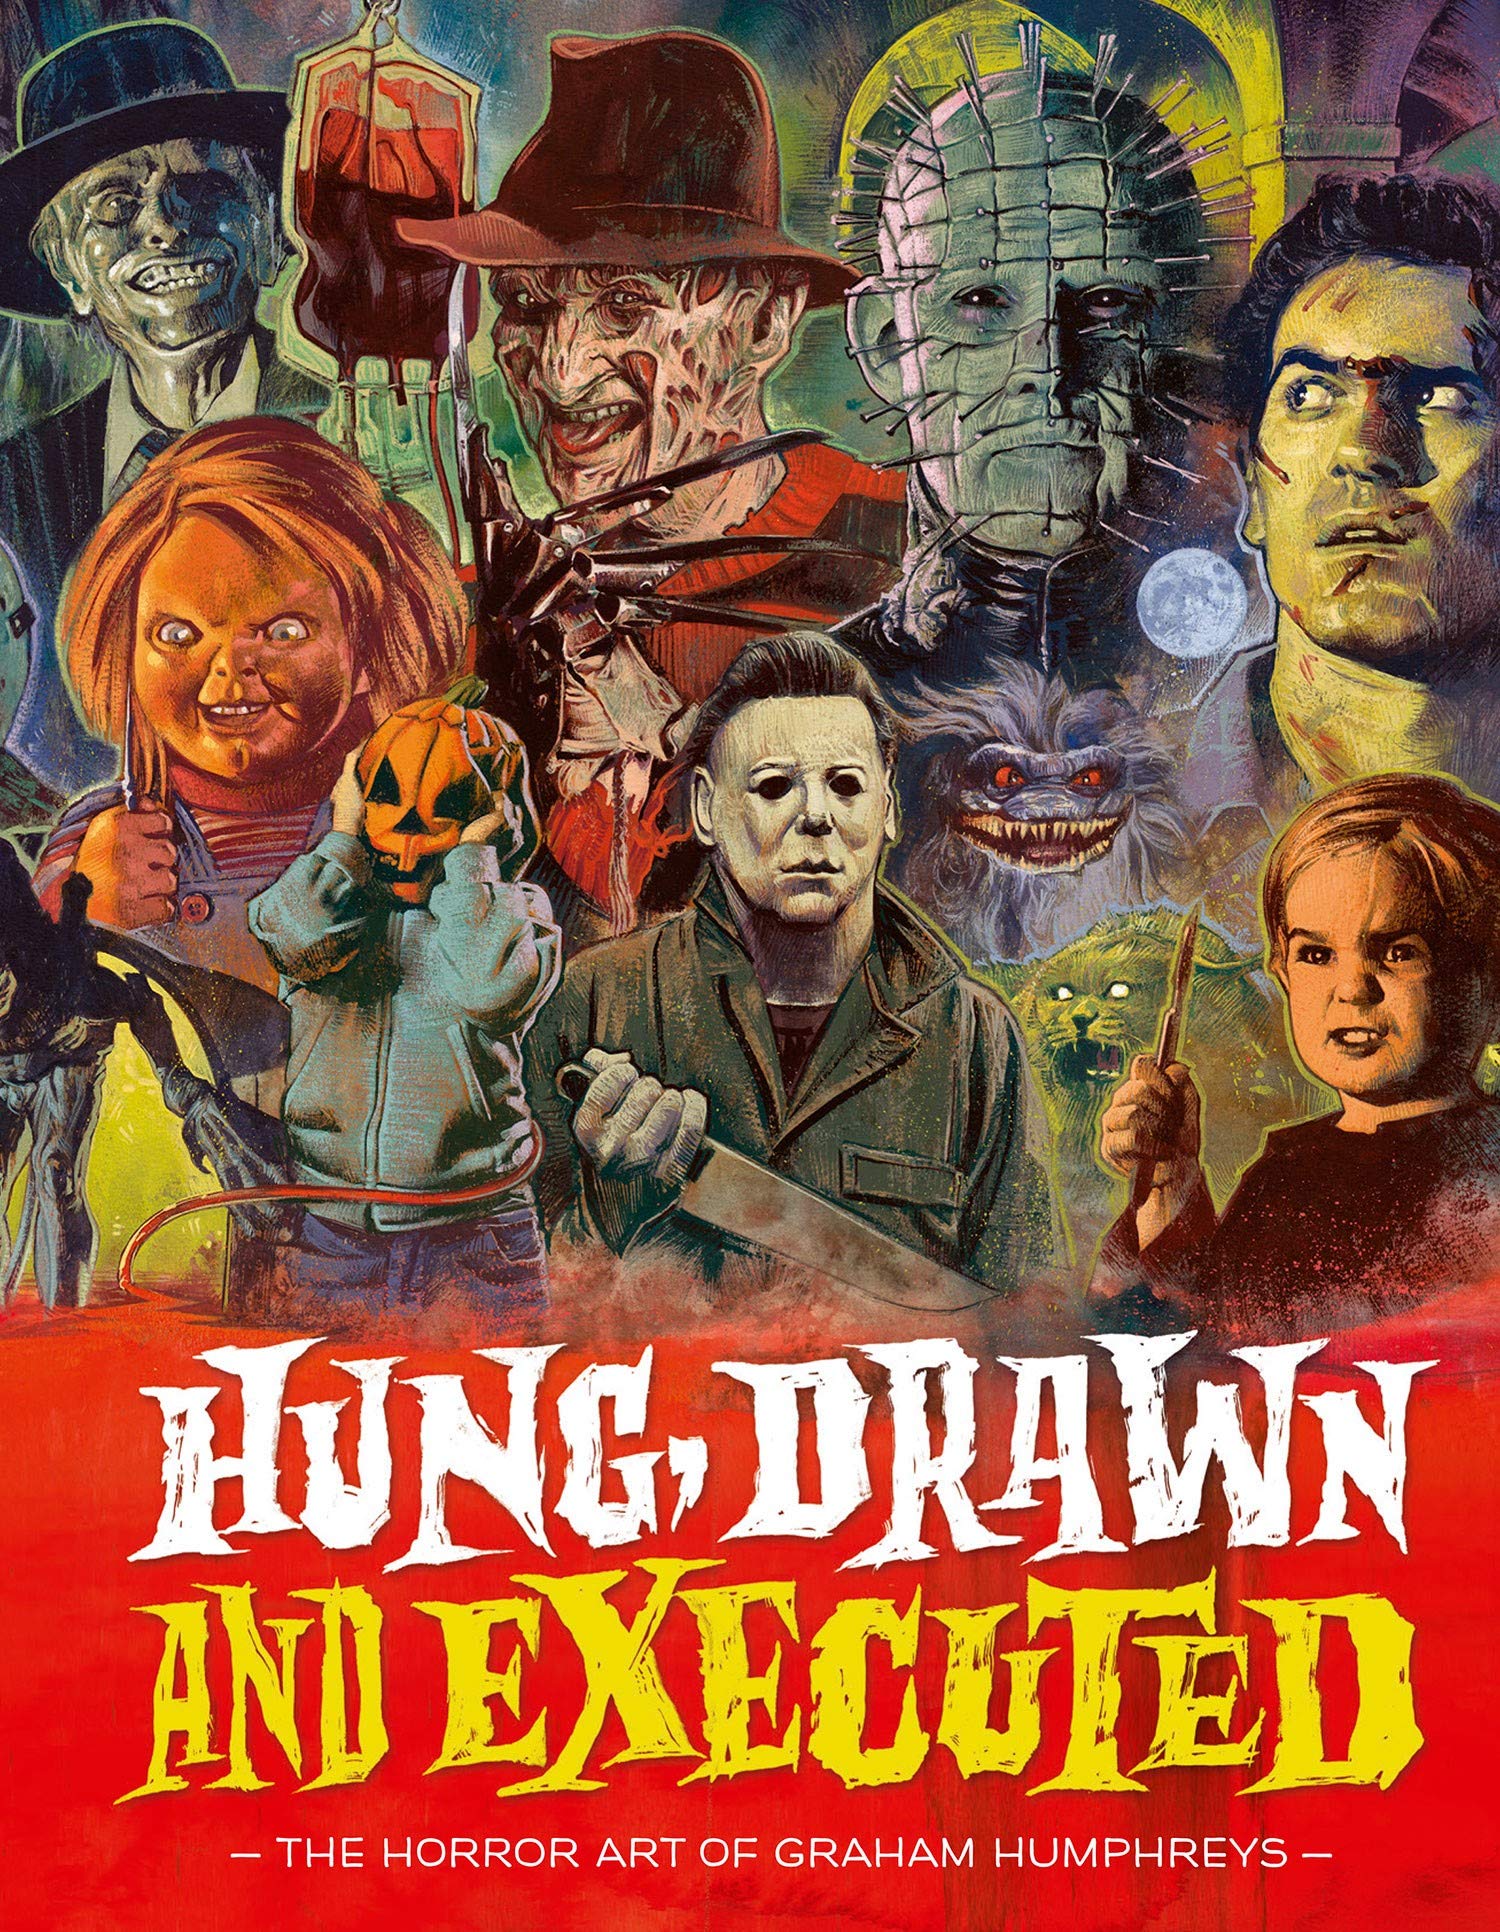 Hung--Drawn-and-Executed-The-Horror-Art-of-Graham-Humphreys